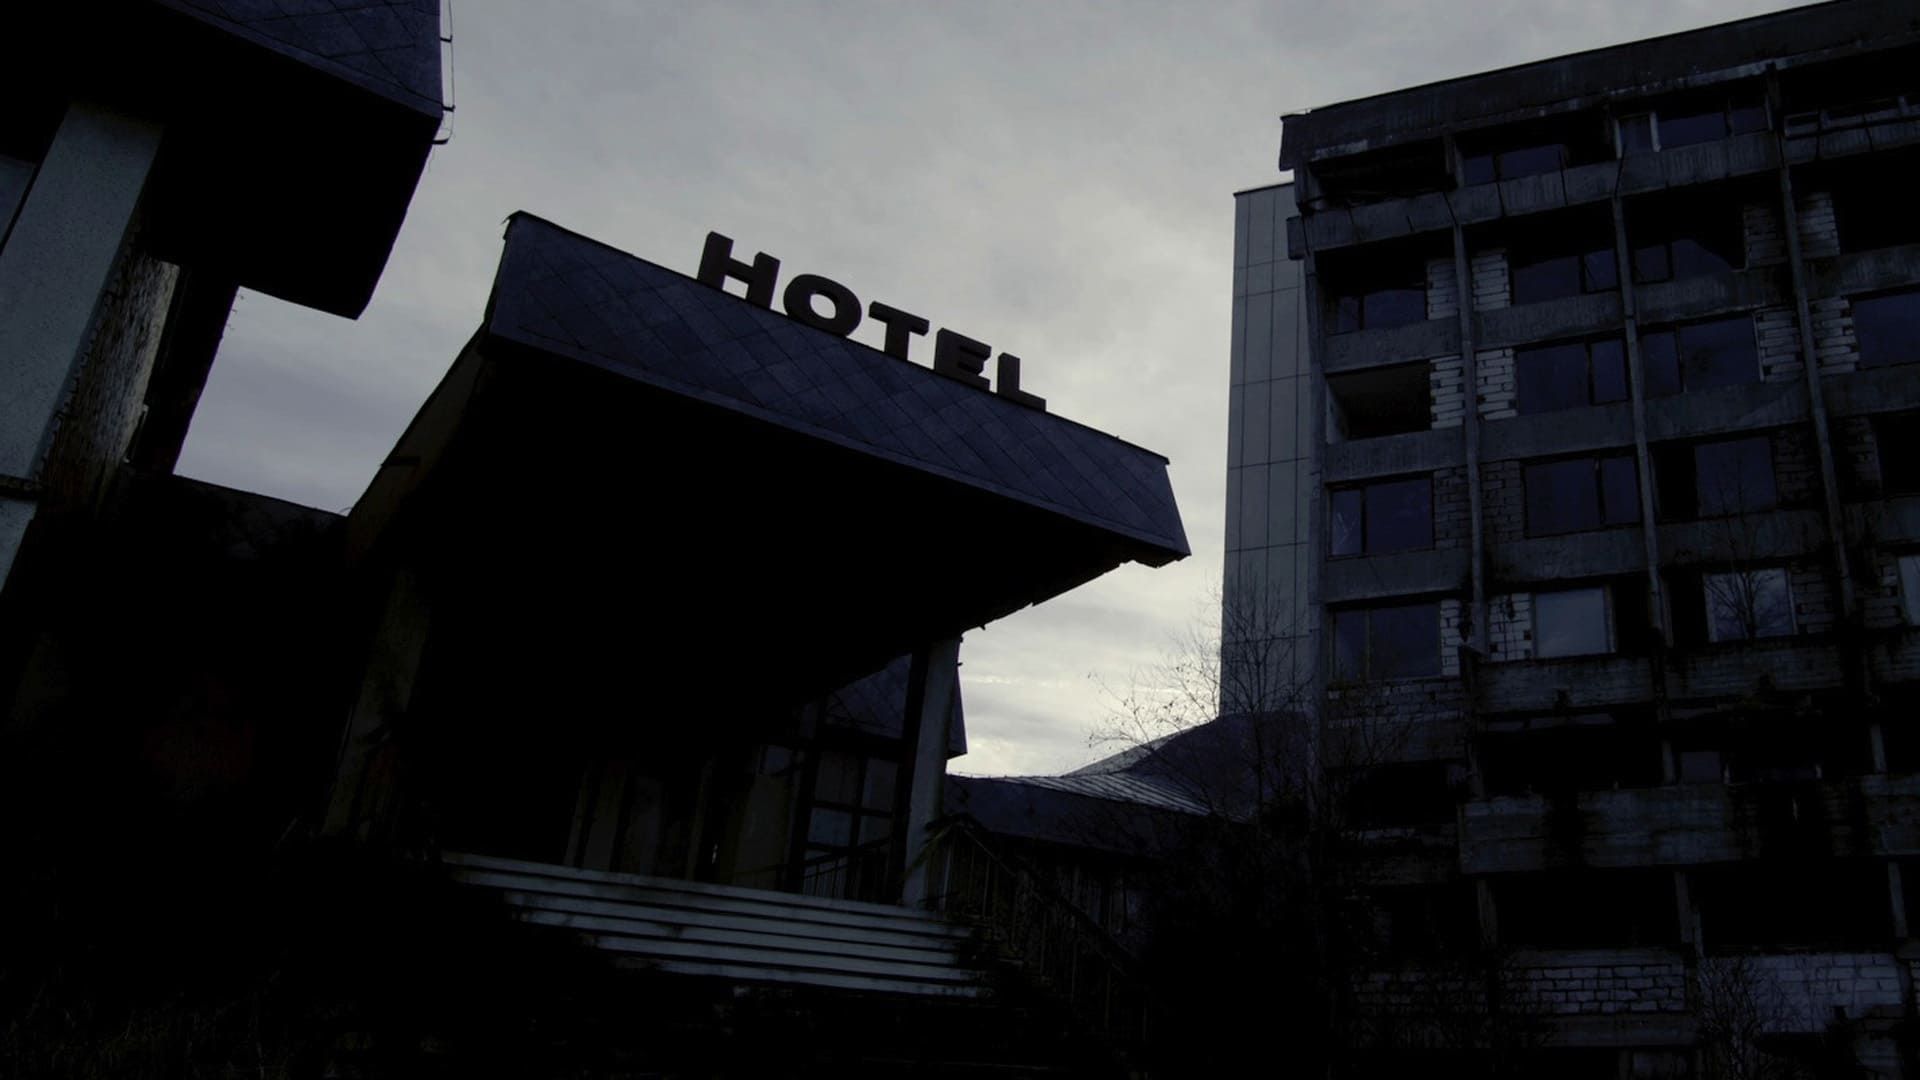 Hotel of the Damned background